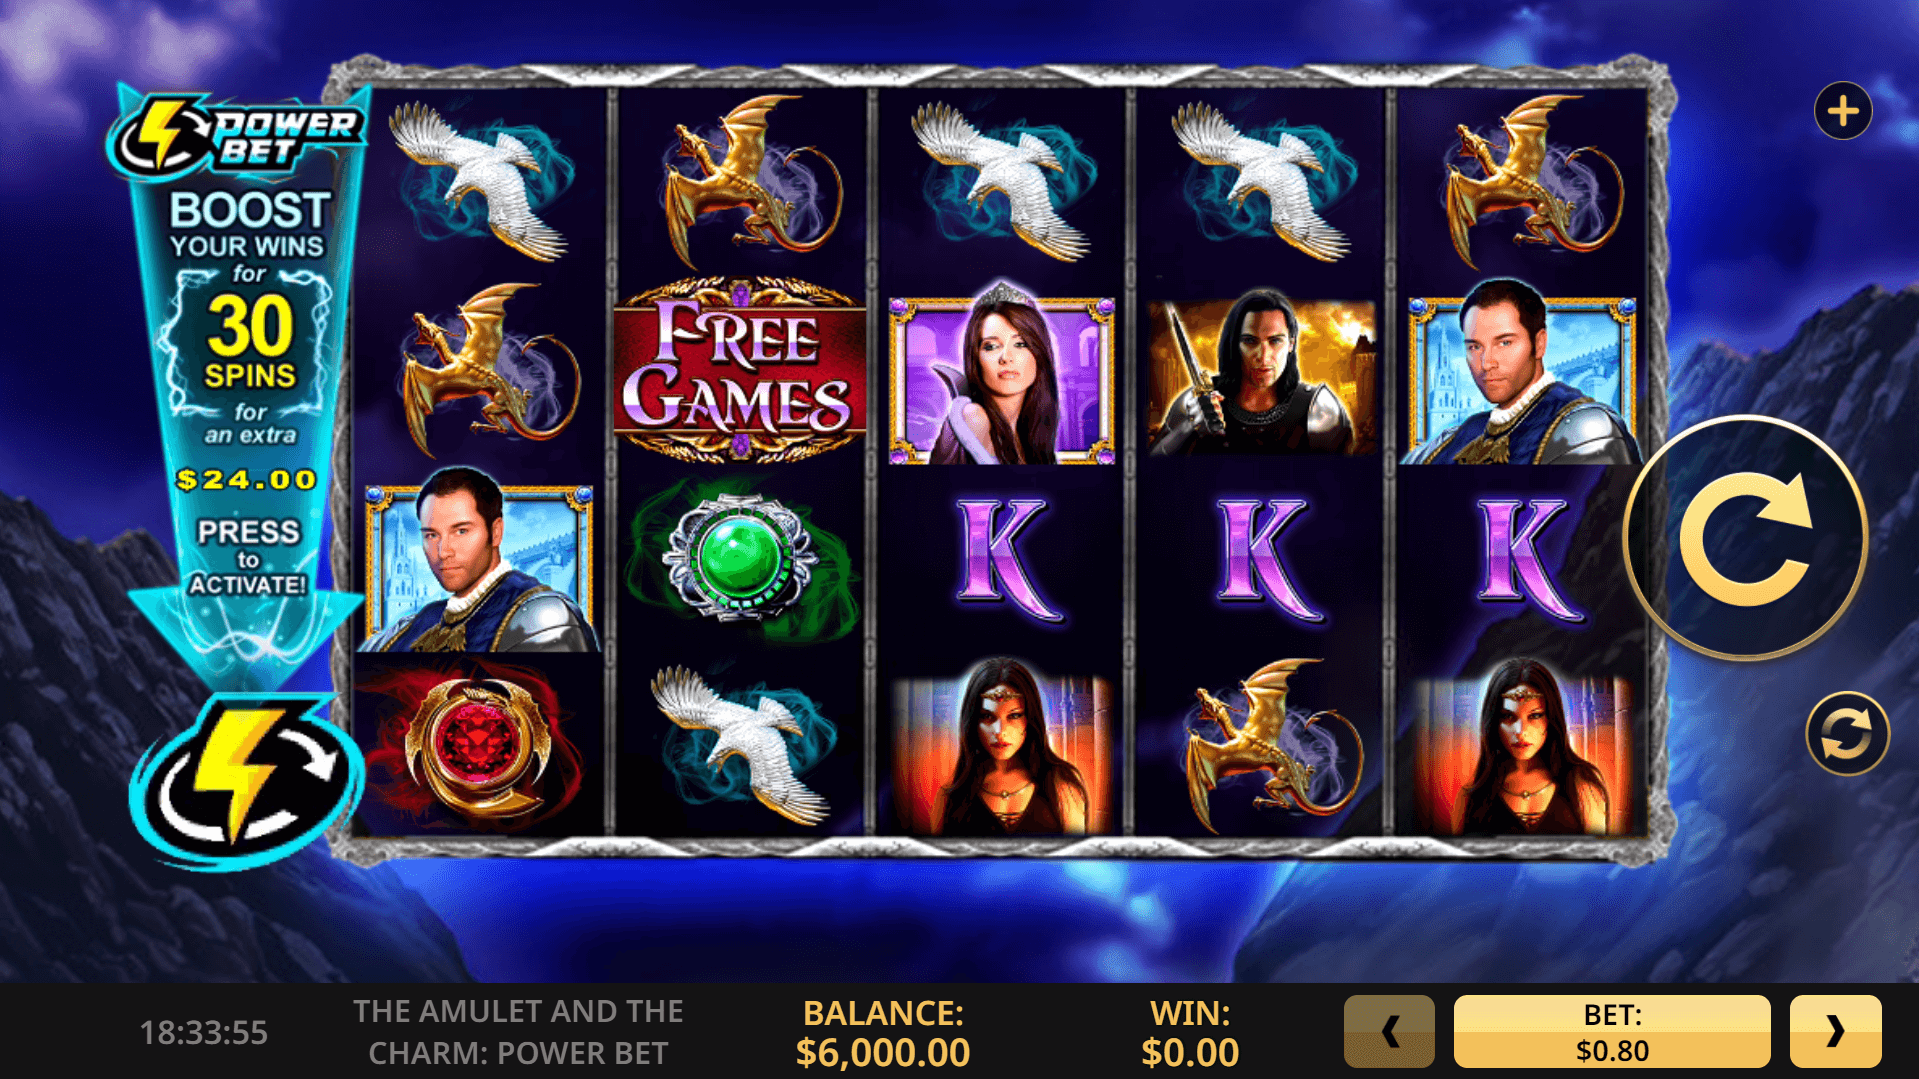 Amulet and Charm Power Bet slot play free